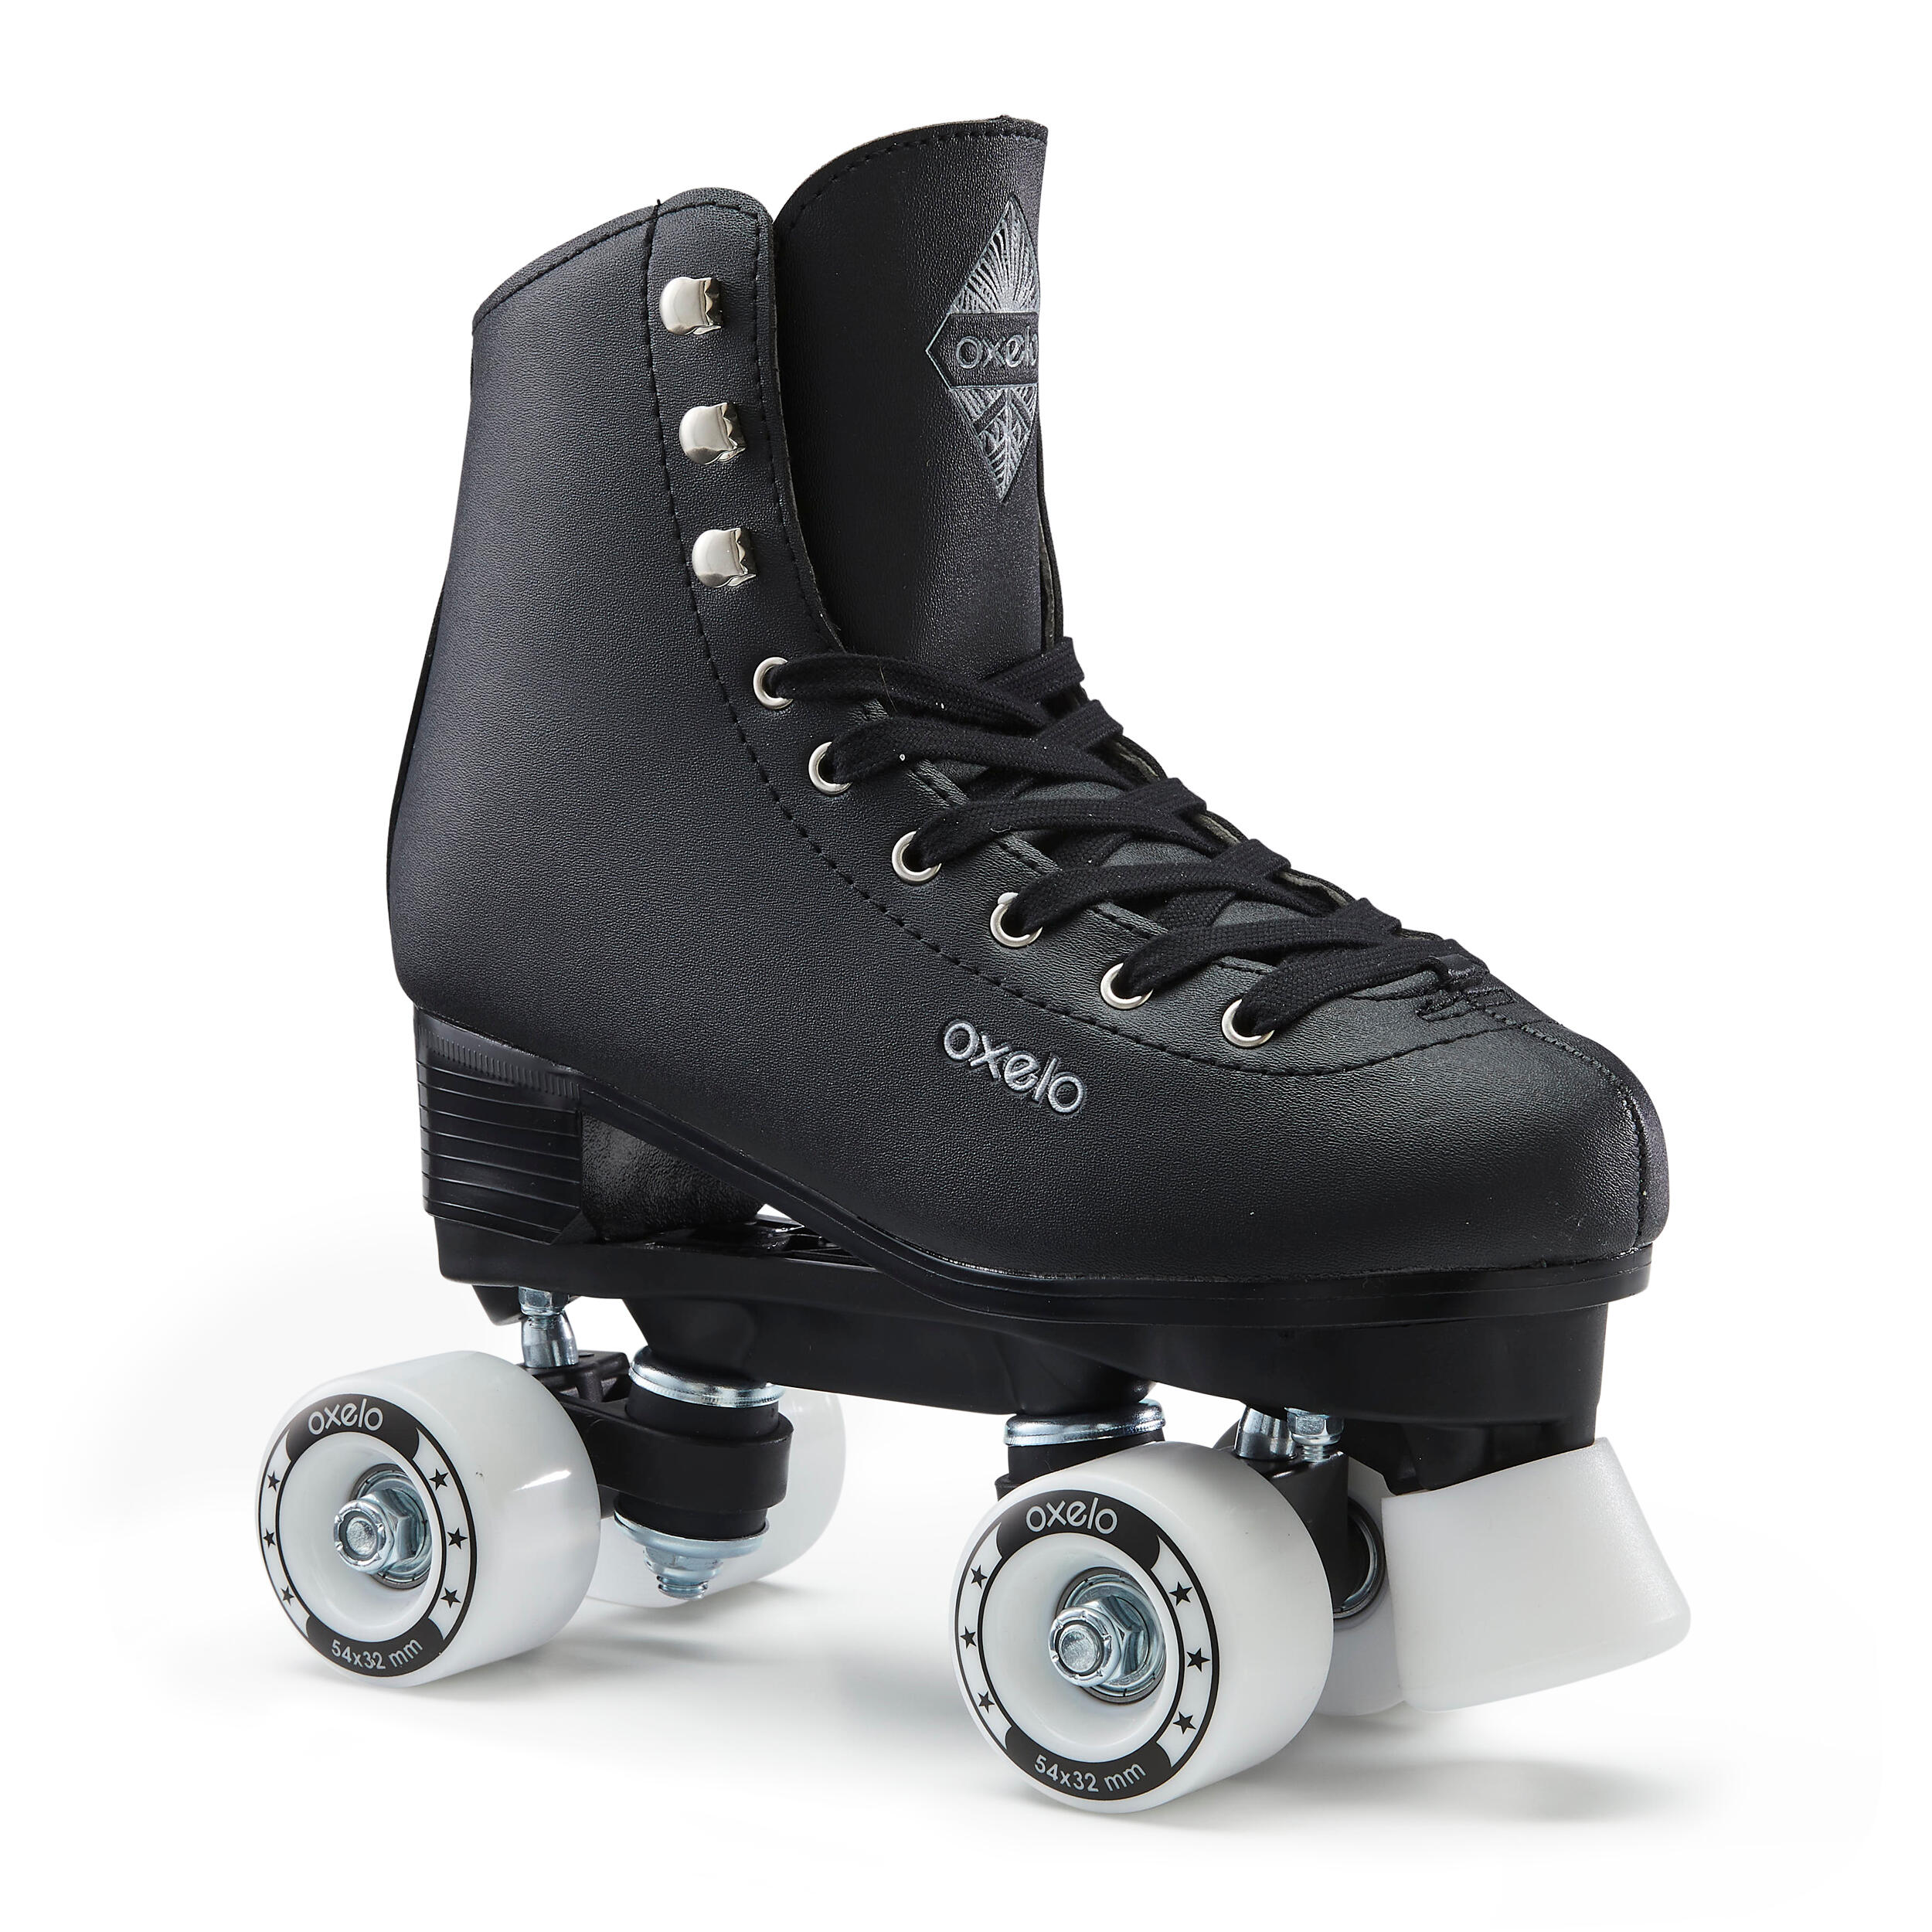 Artistic Indoor Roller Skates with high boots for kids teens and adults Rye 